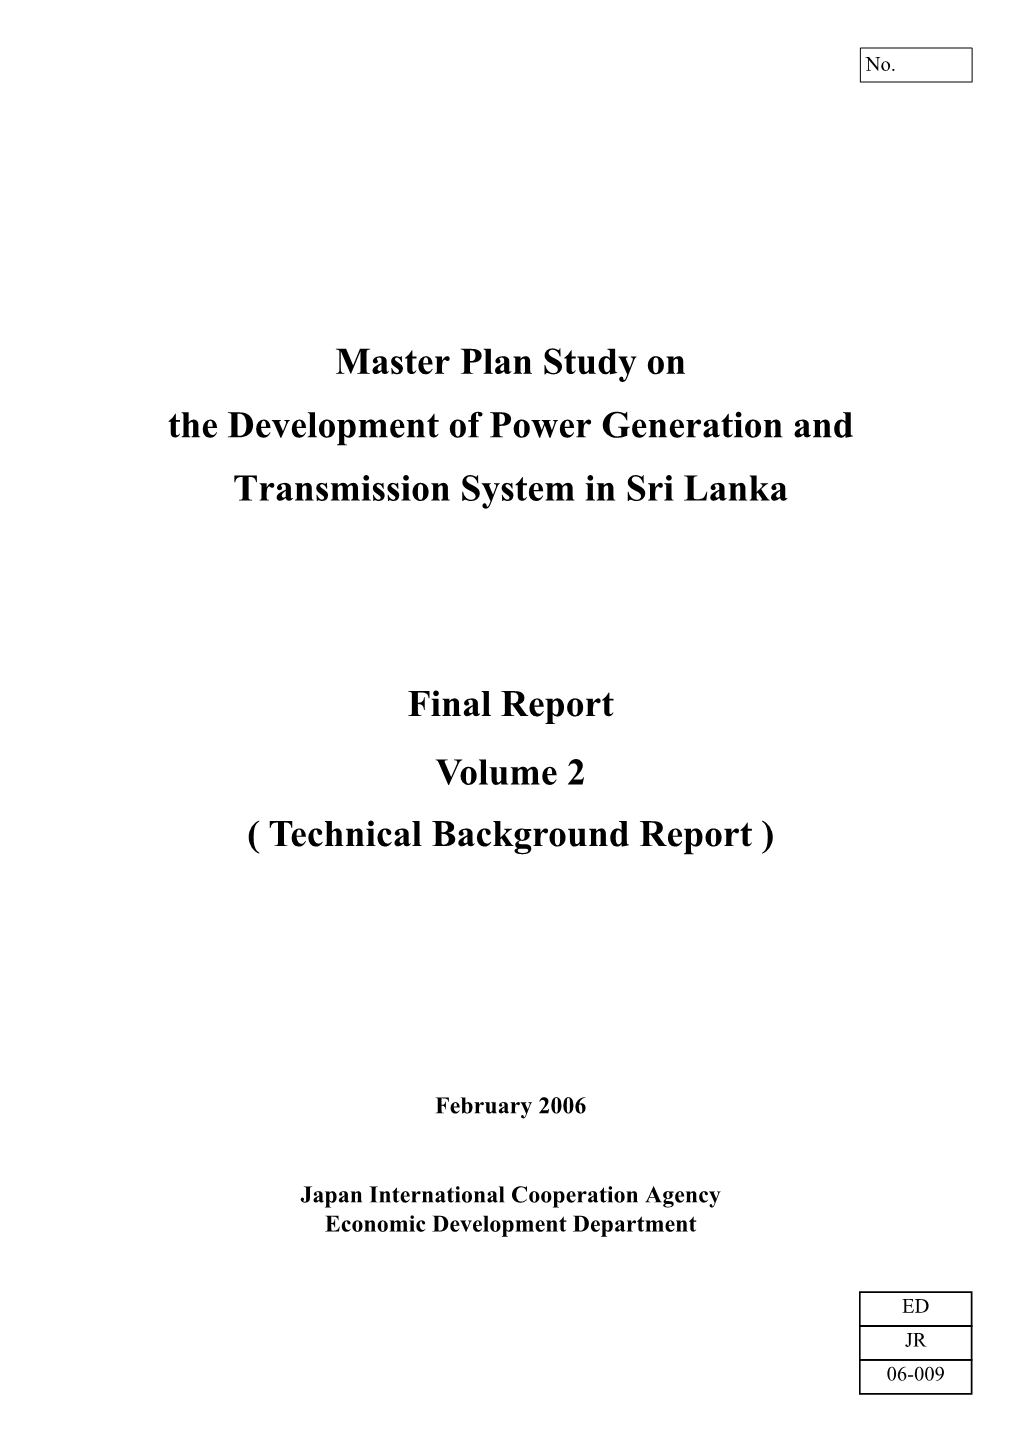 Master Plan Study on the Development of Power Generation And